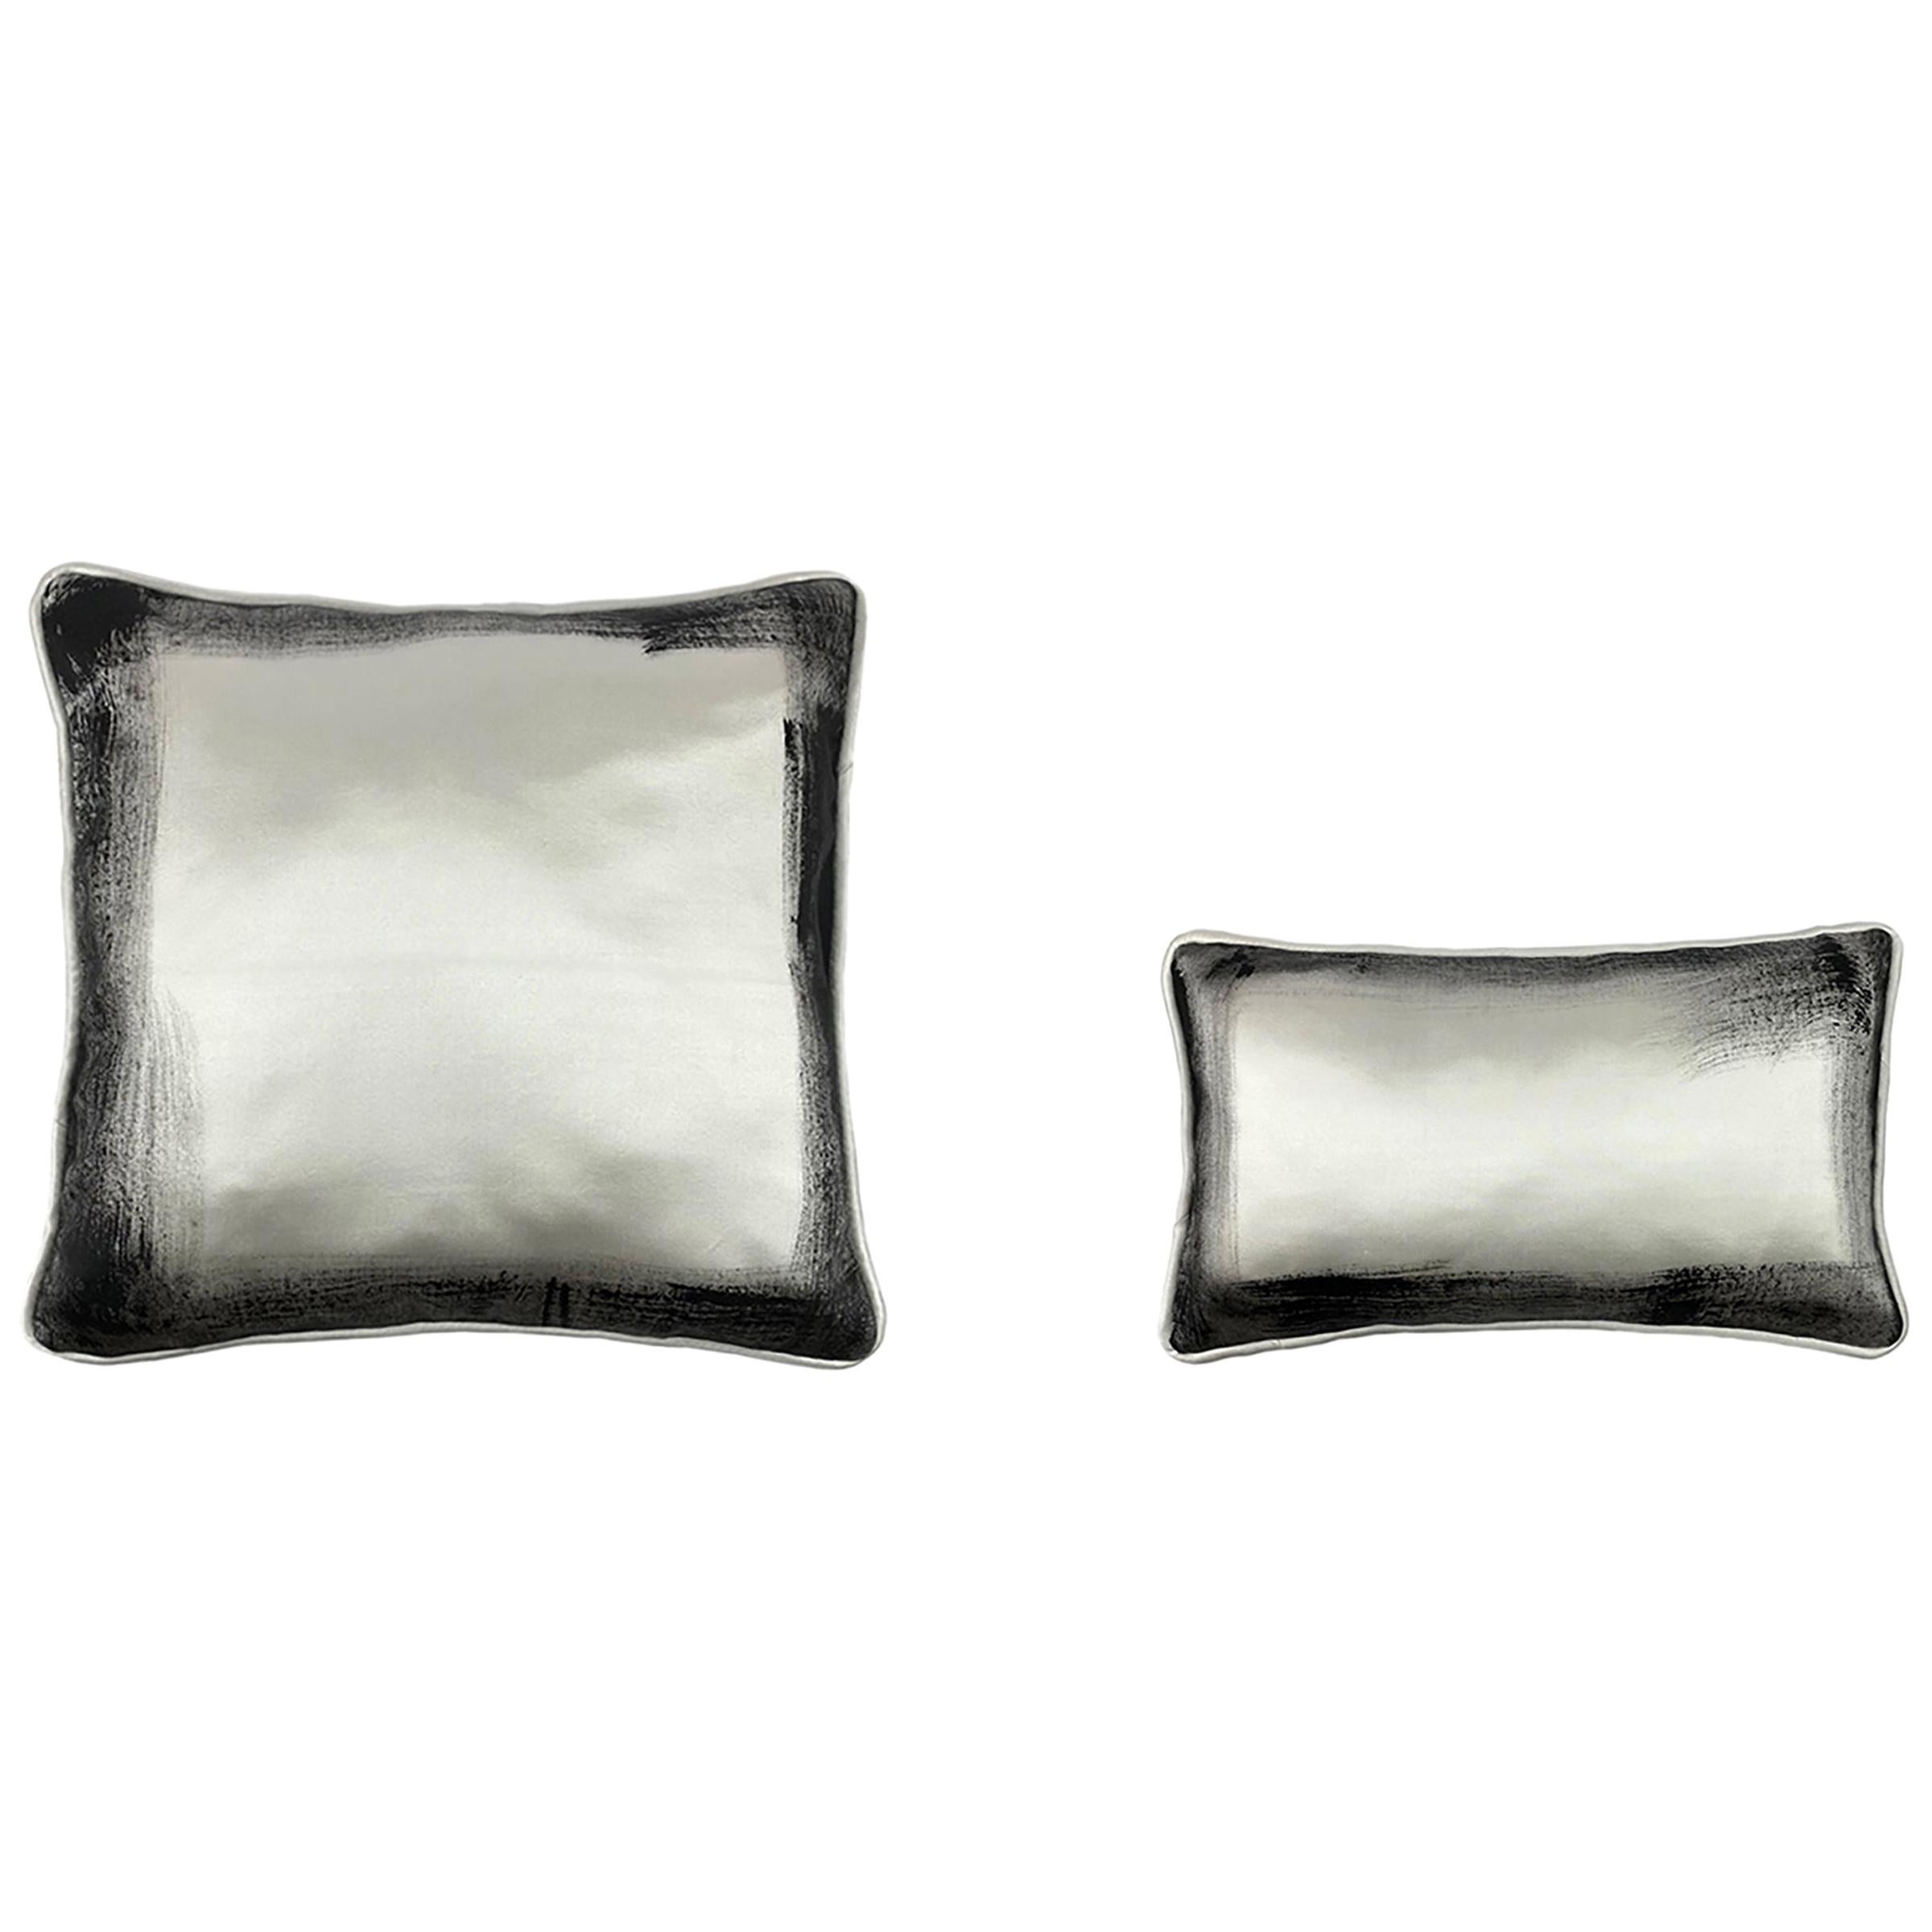 Off-White Contemporary Delicately Hand-Painted Black-Edged Throw Pillows